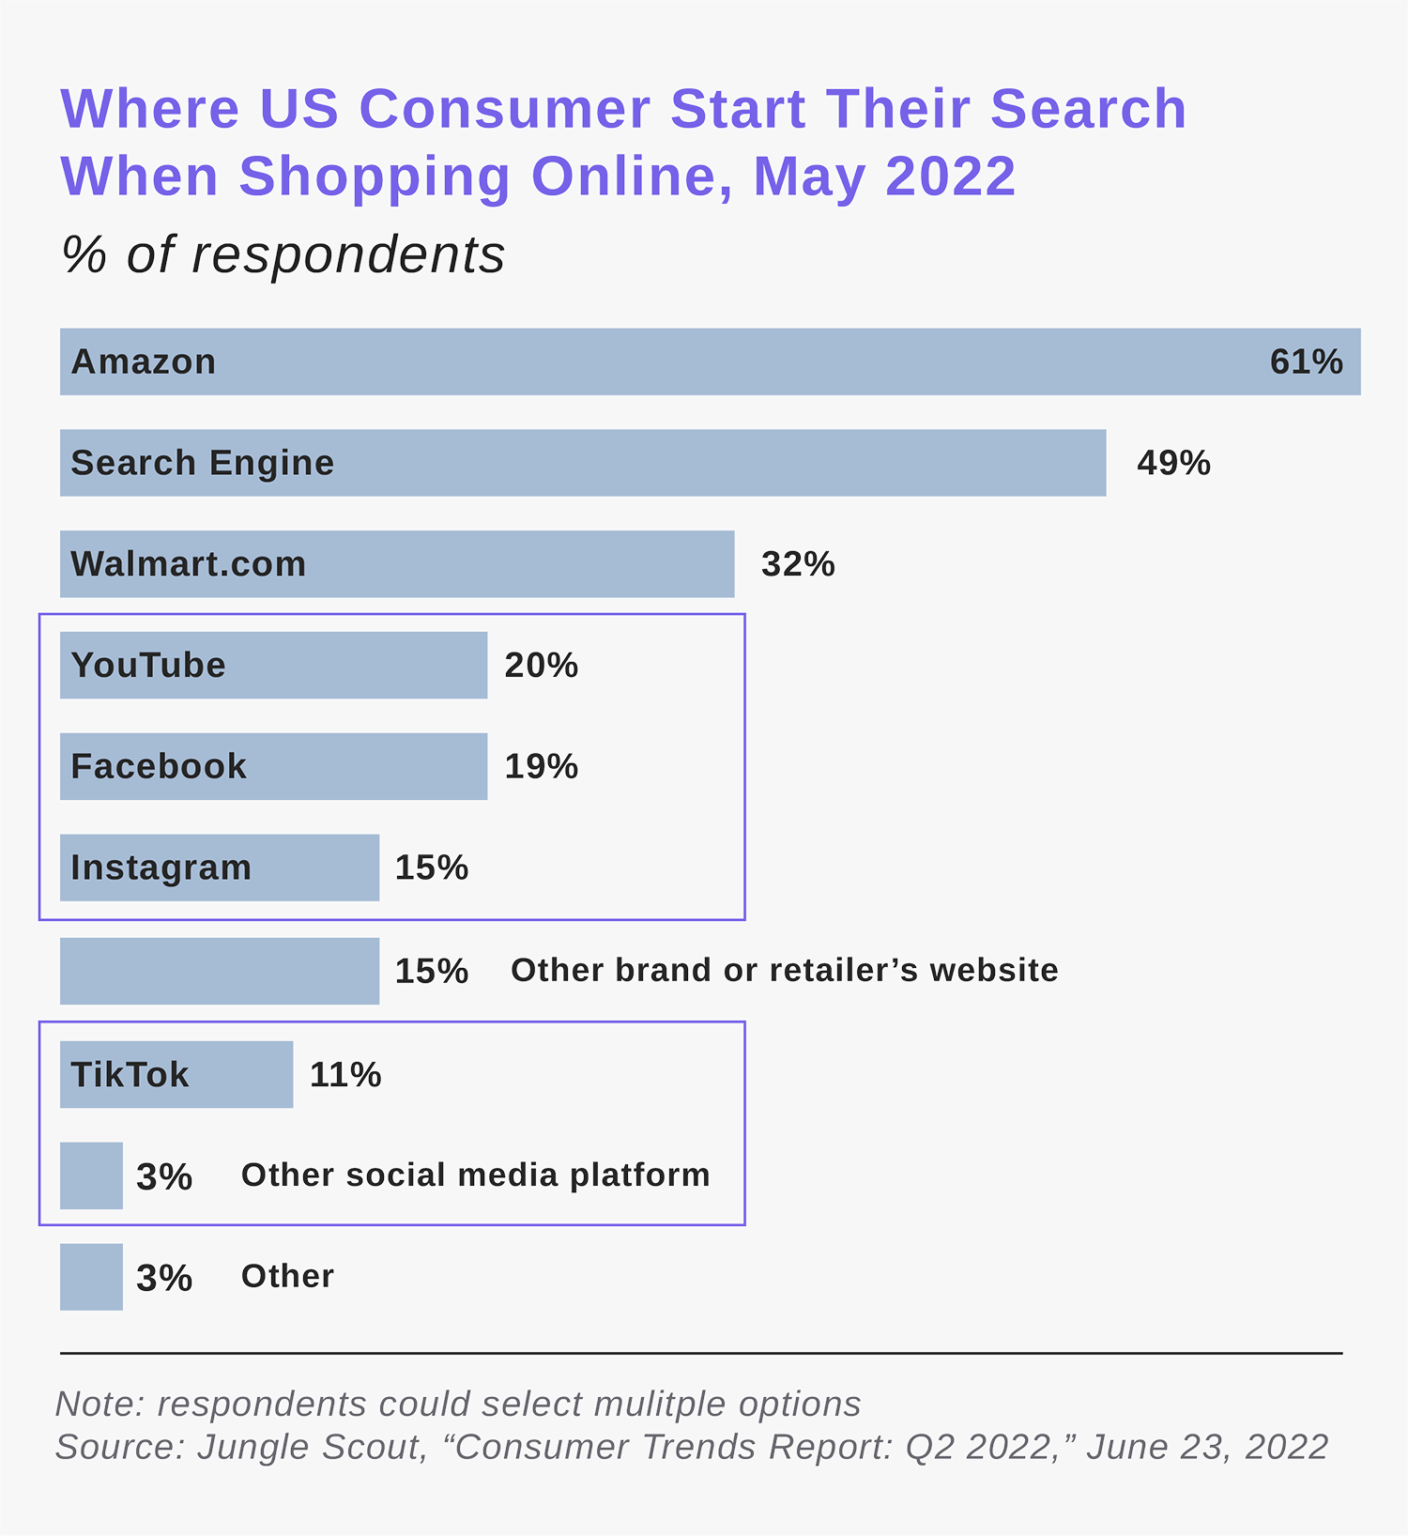 Where do consumers start their search online